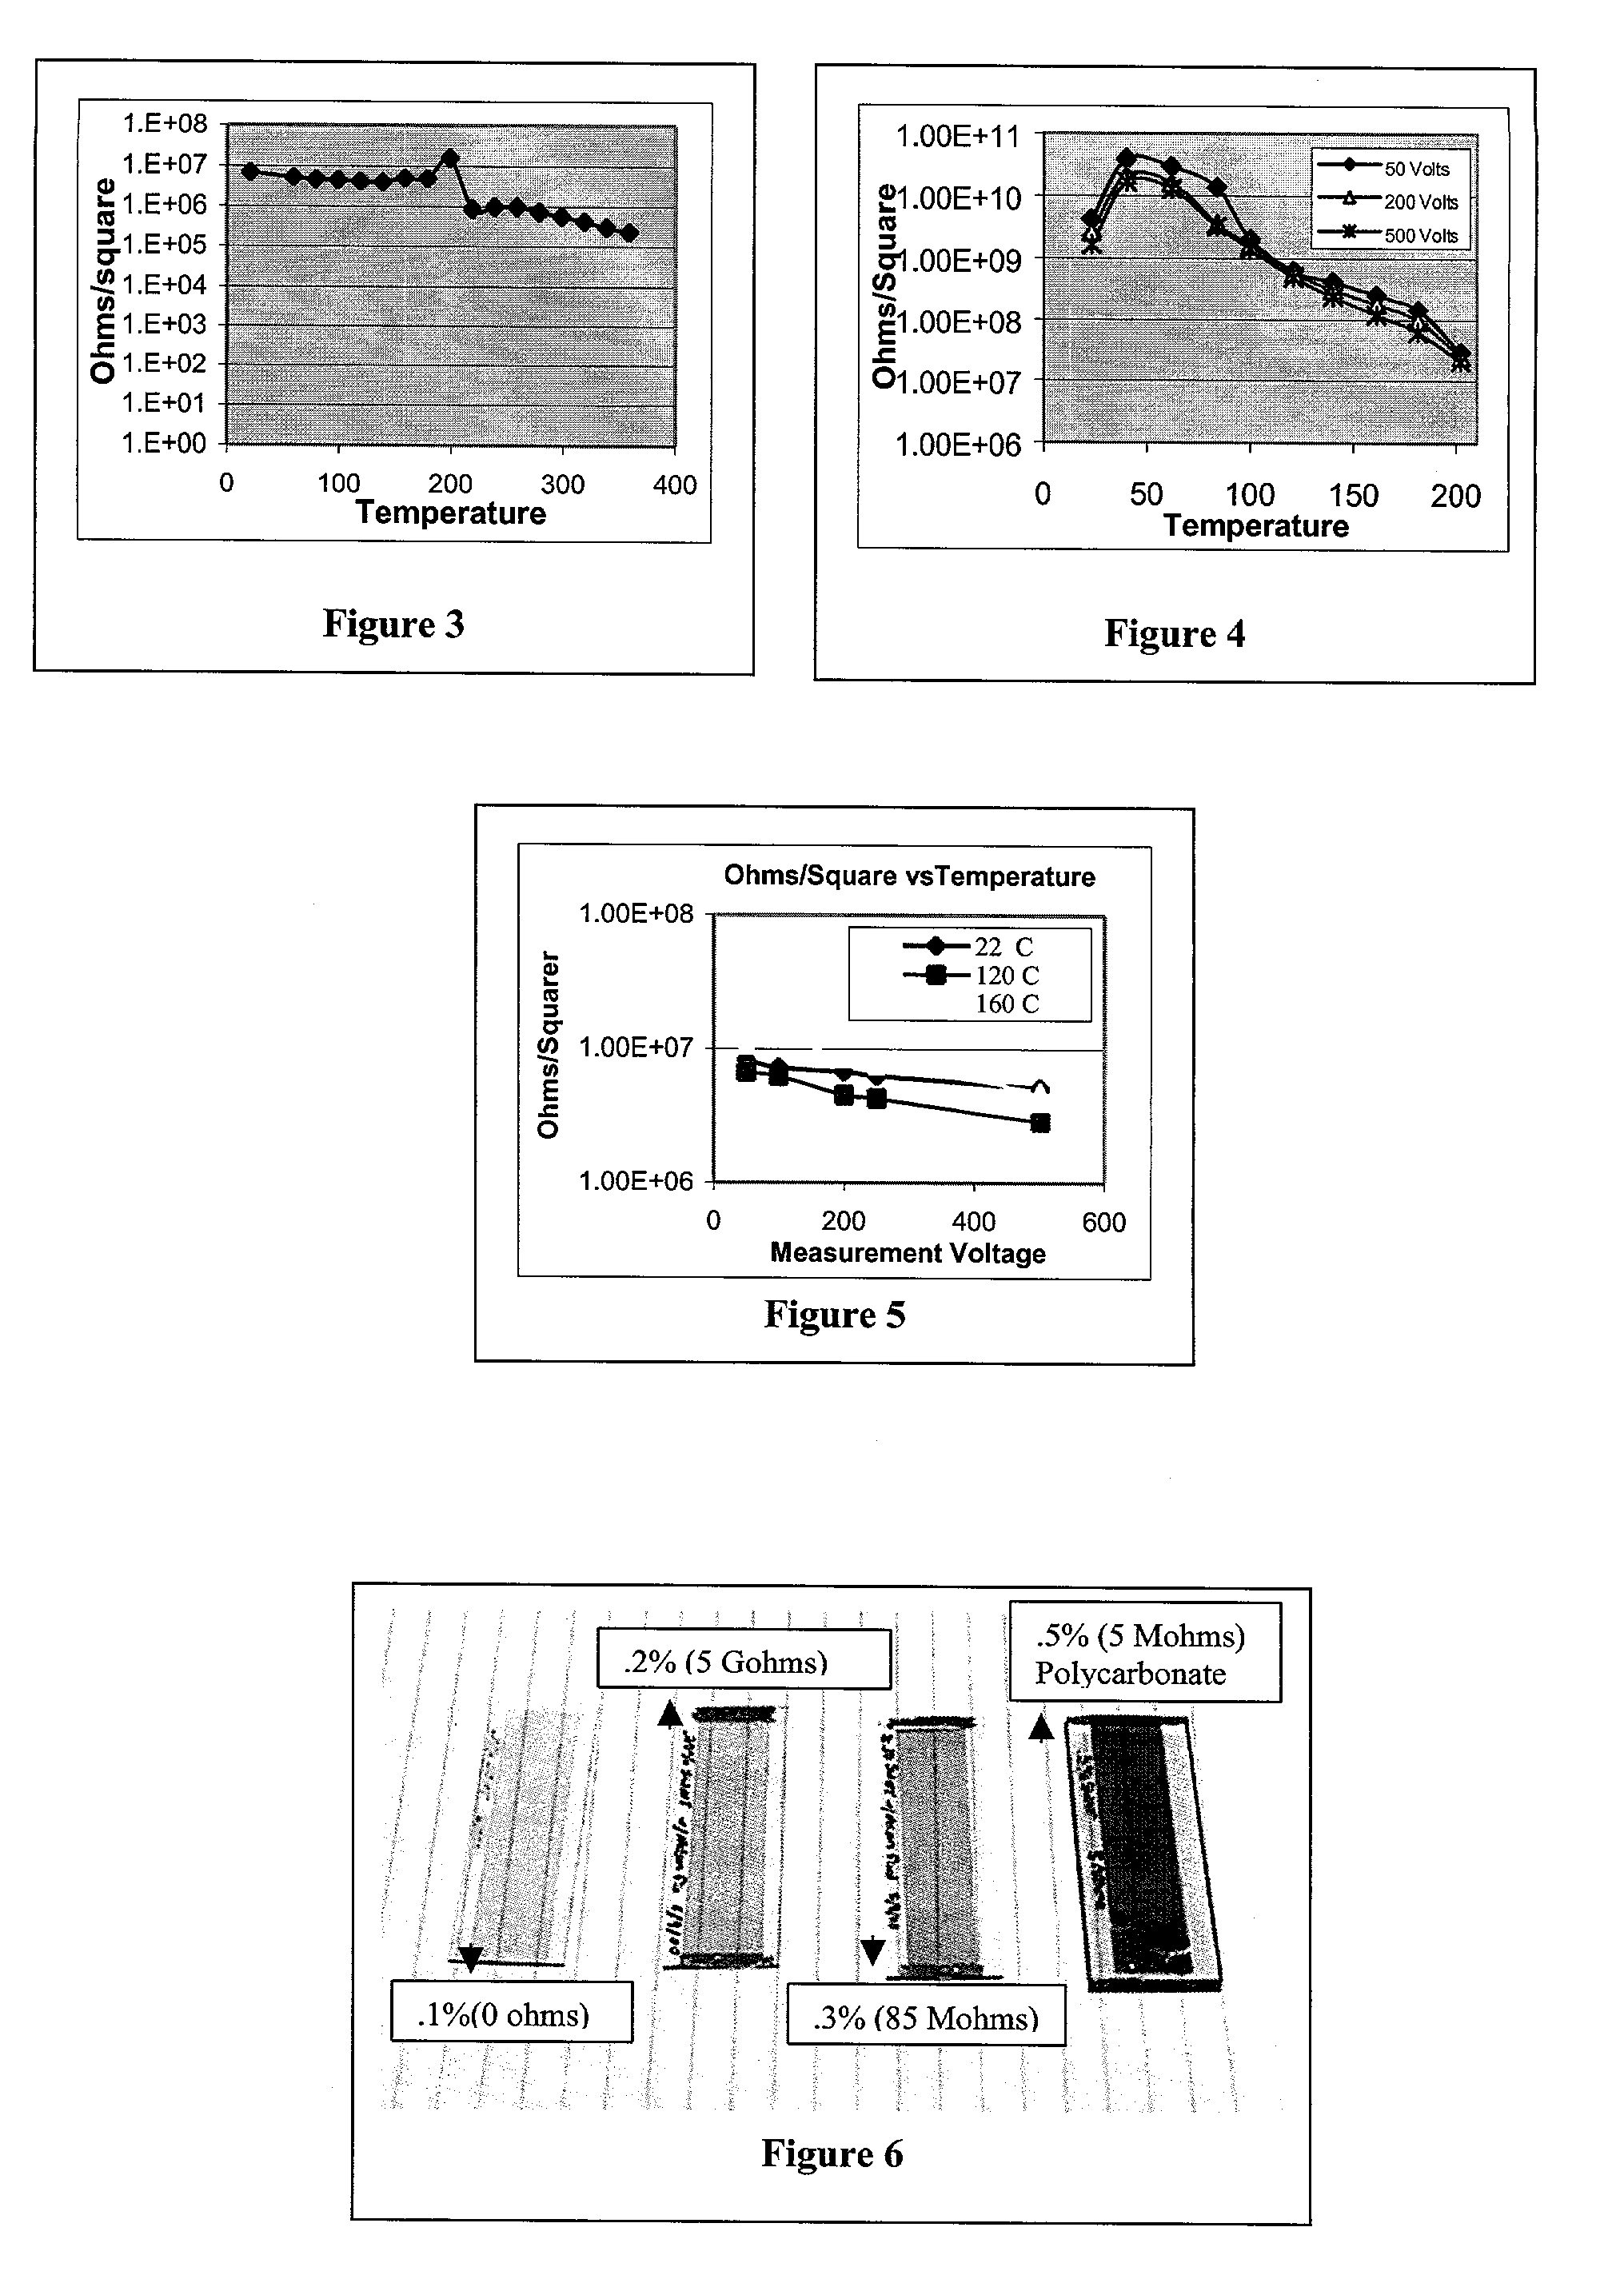 Coatings comprising carbon nanotubes and methods for forming same